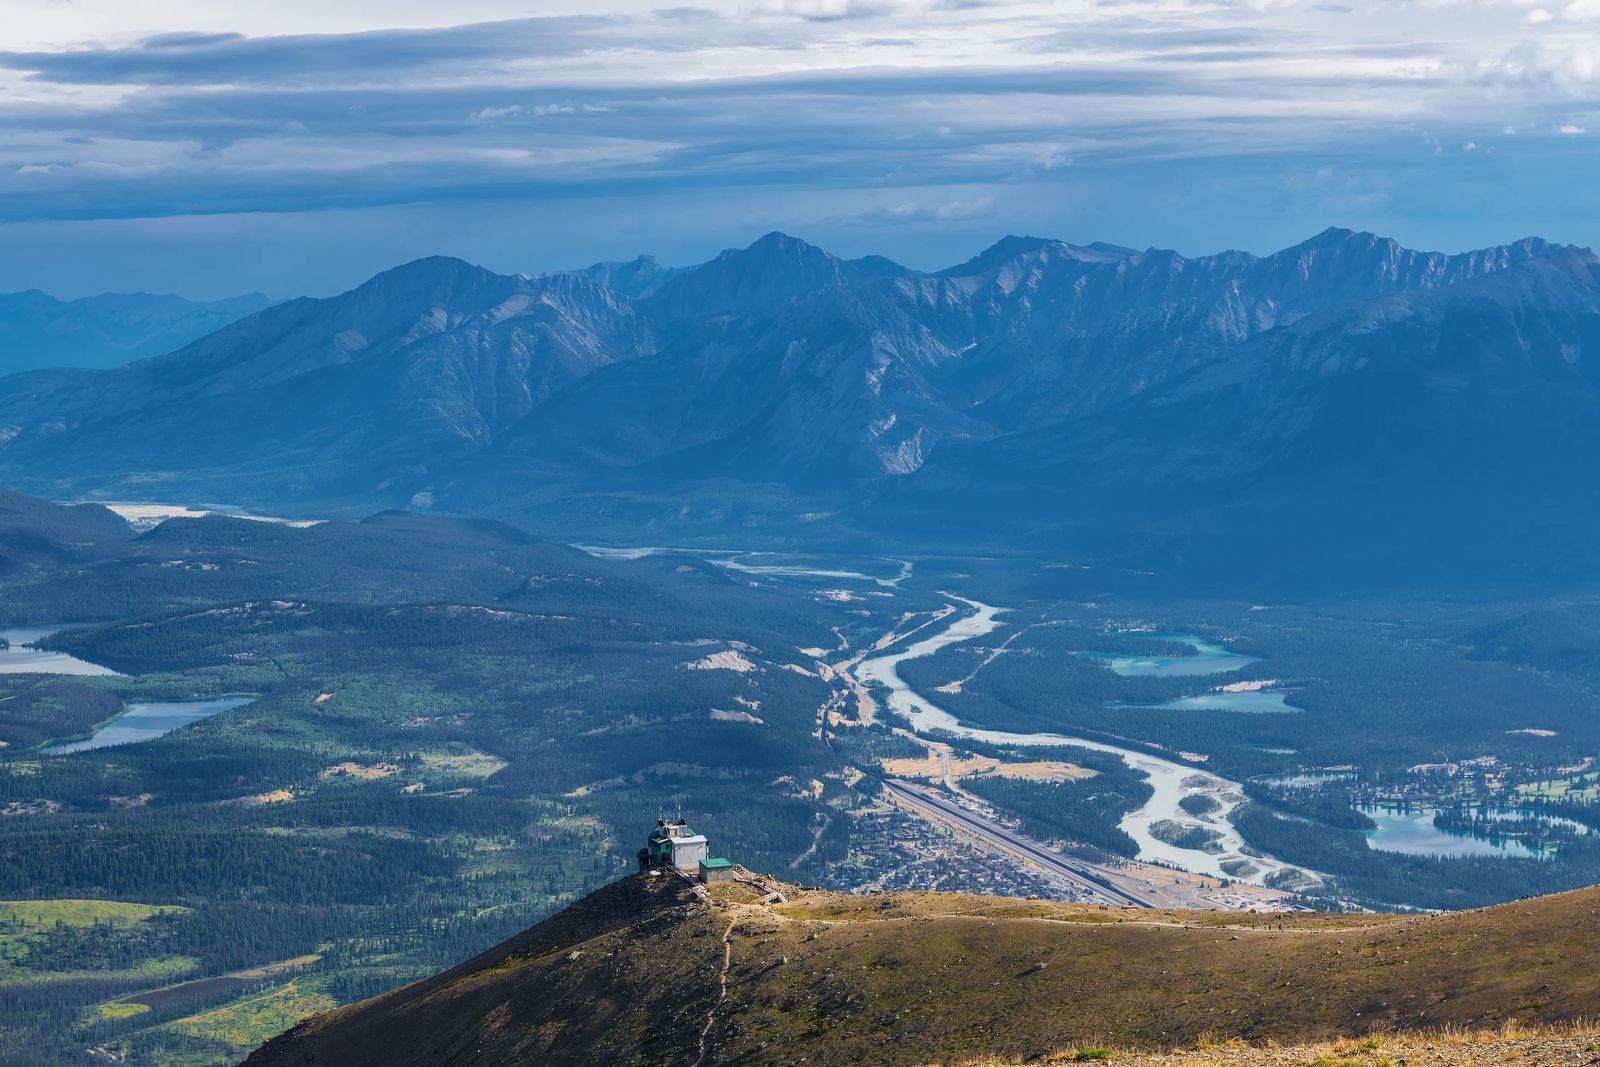 Birds Eye View of Jasper From Top of Sky Tram - Best places to visit in Jasper National Park